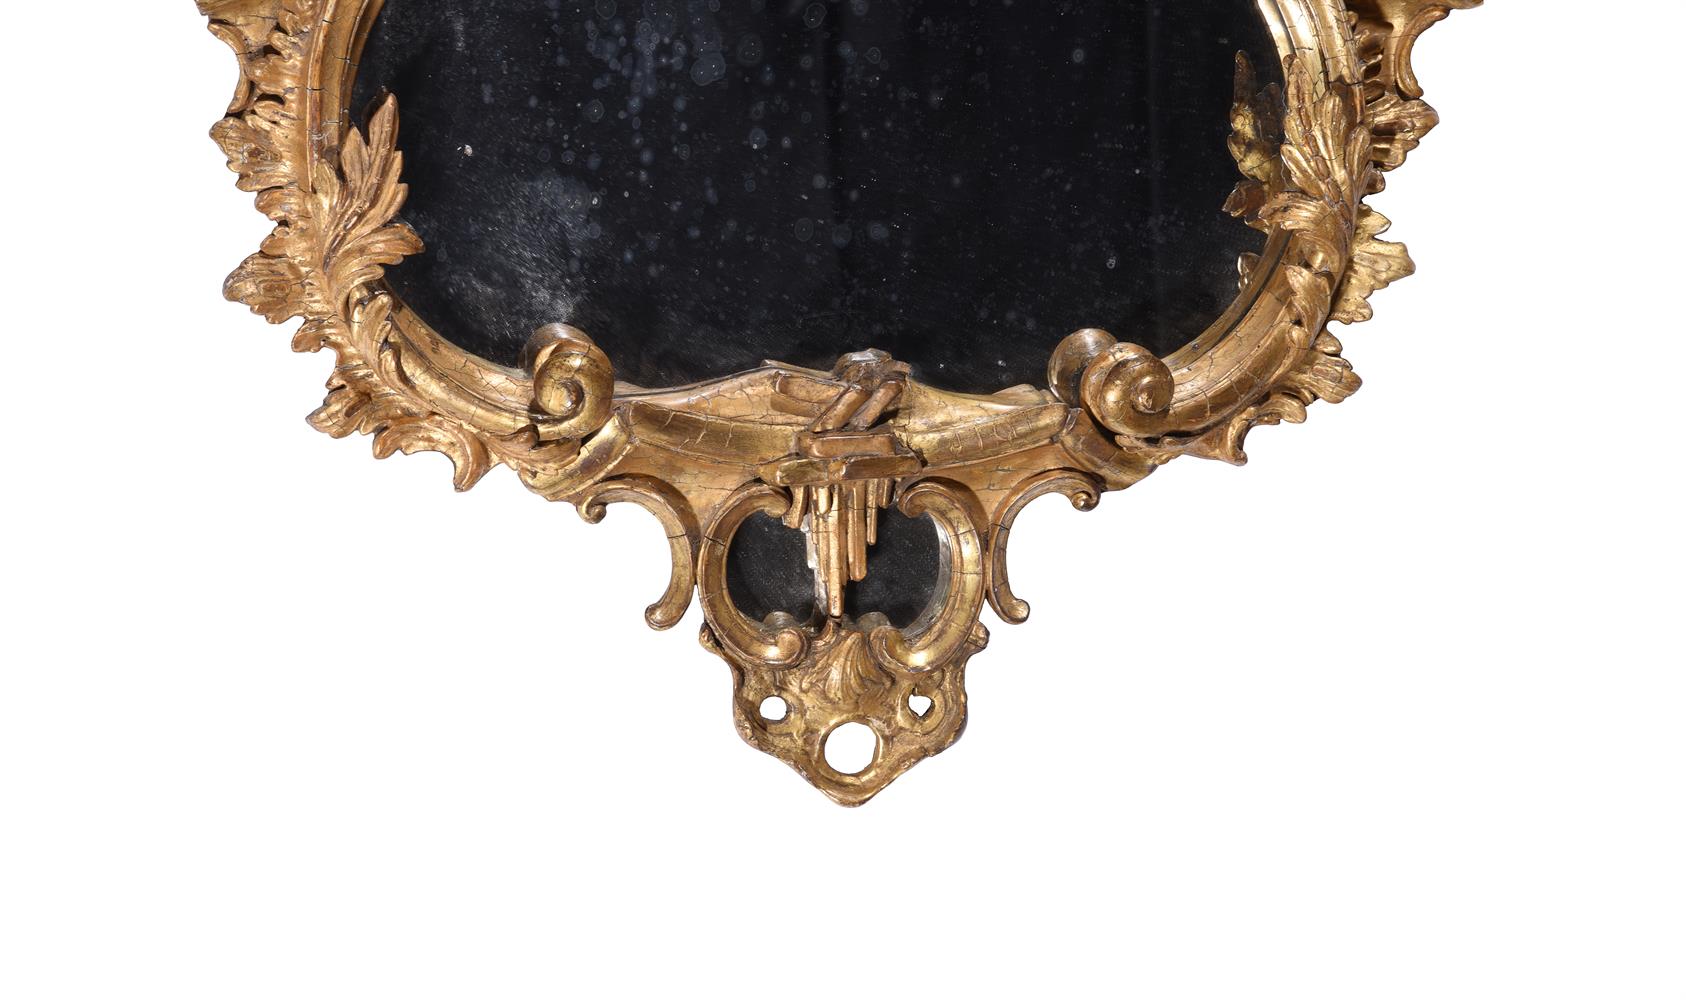 A GEORGE III CARVED GILTWOOD MIRROR, CIRCA 1770 - Image 3 of 3